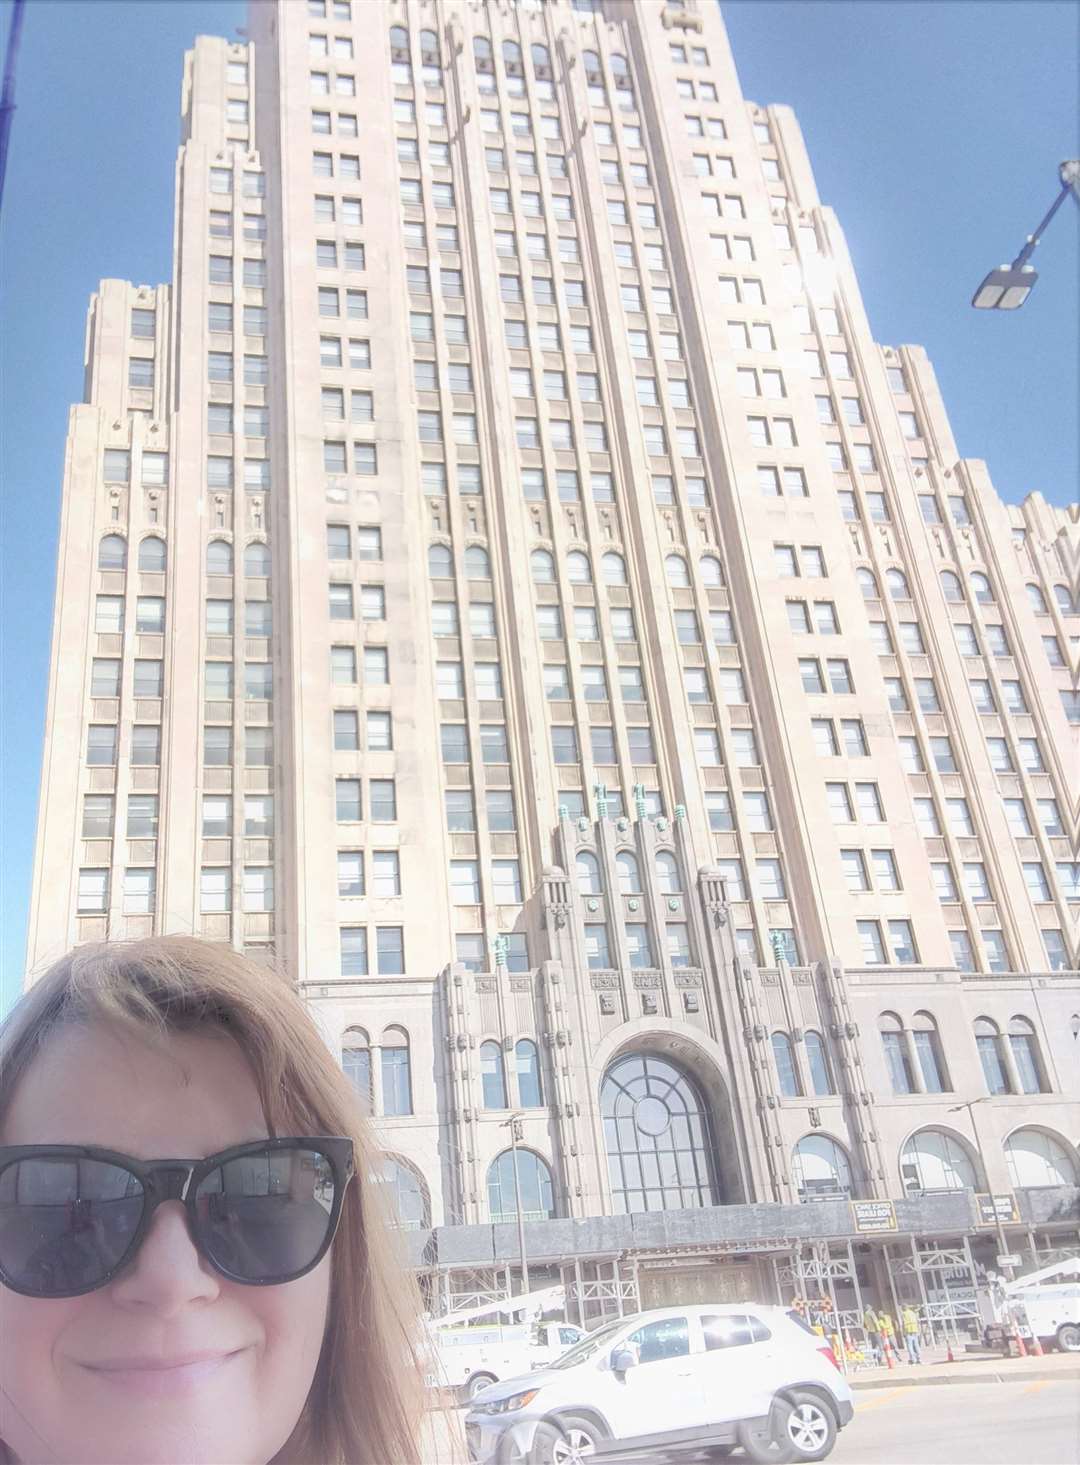 The Fisher Building with Lisa Mulholland in Chicago.